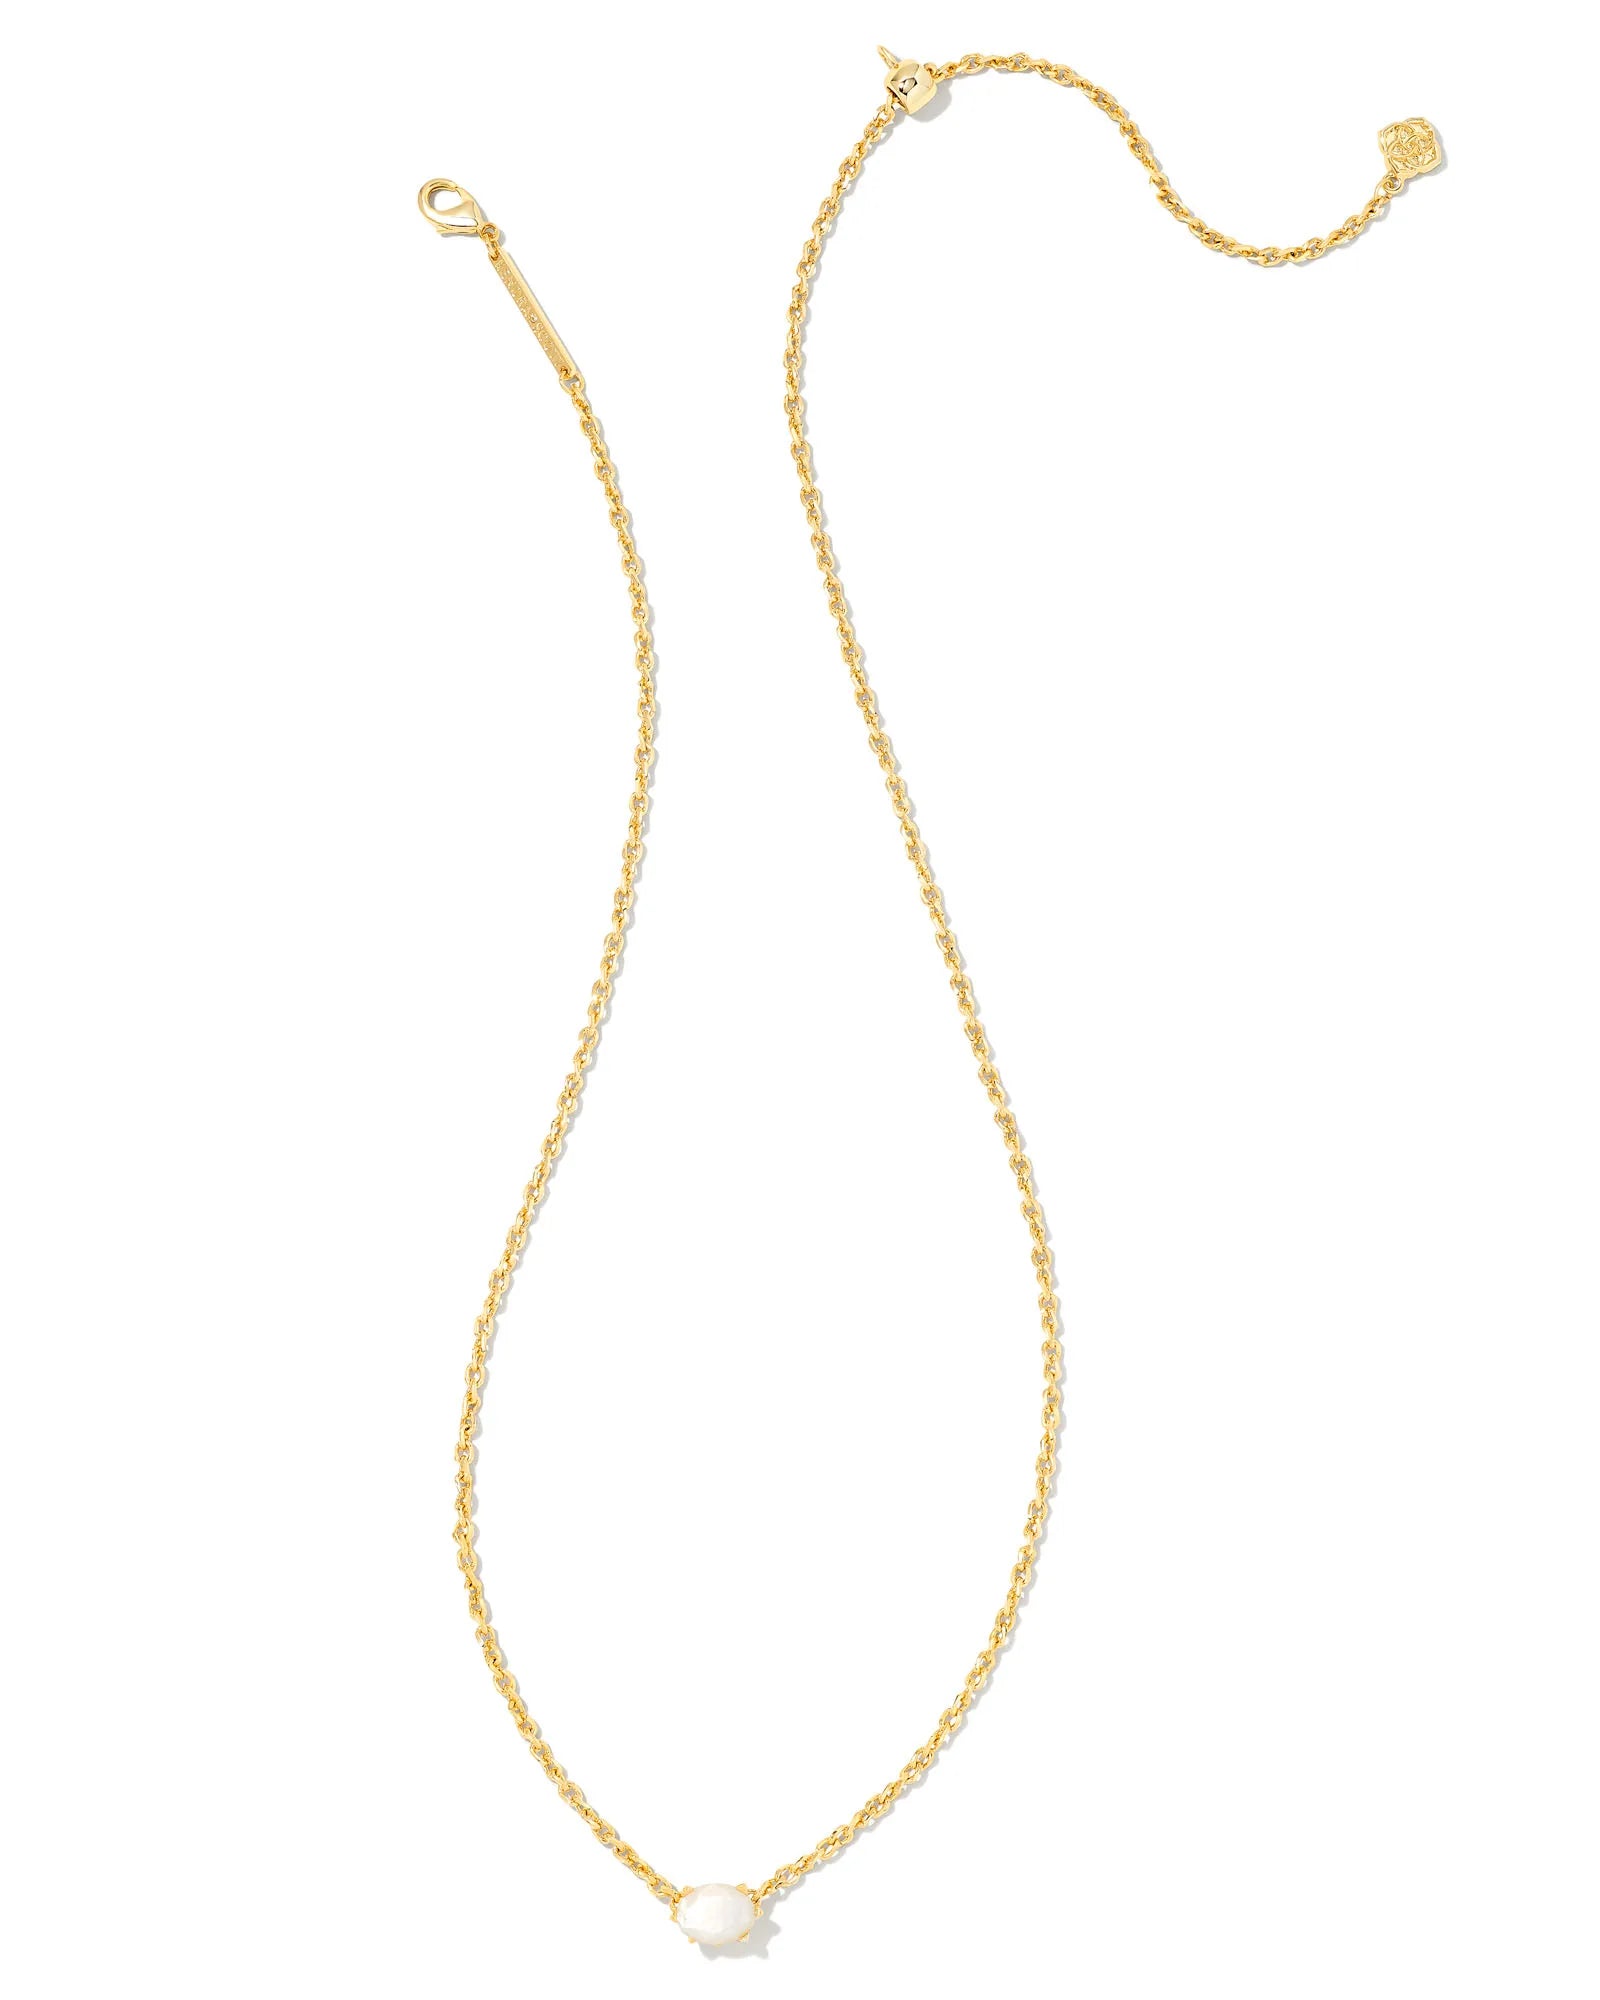 Kendra Scott Cailin Crystal Pendant Necklace Gold Ivory Mother of Pearl-Necklaces-Kendra Scott-N1941GLD-The Twisted Chandelier